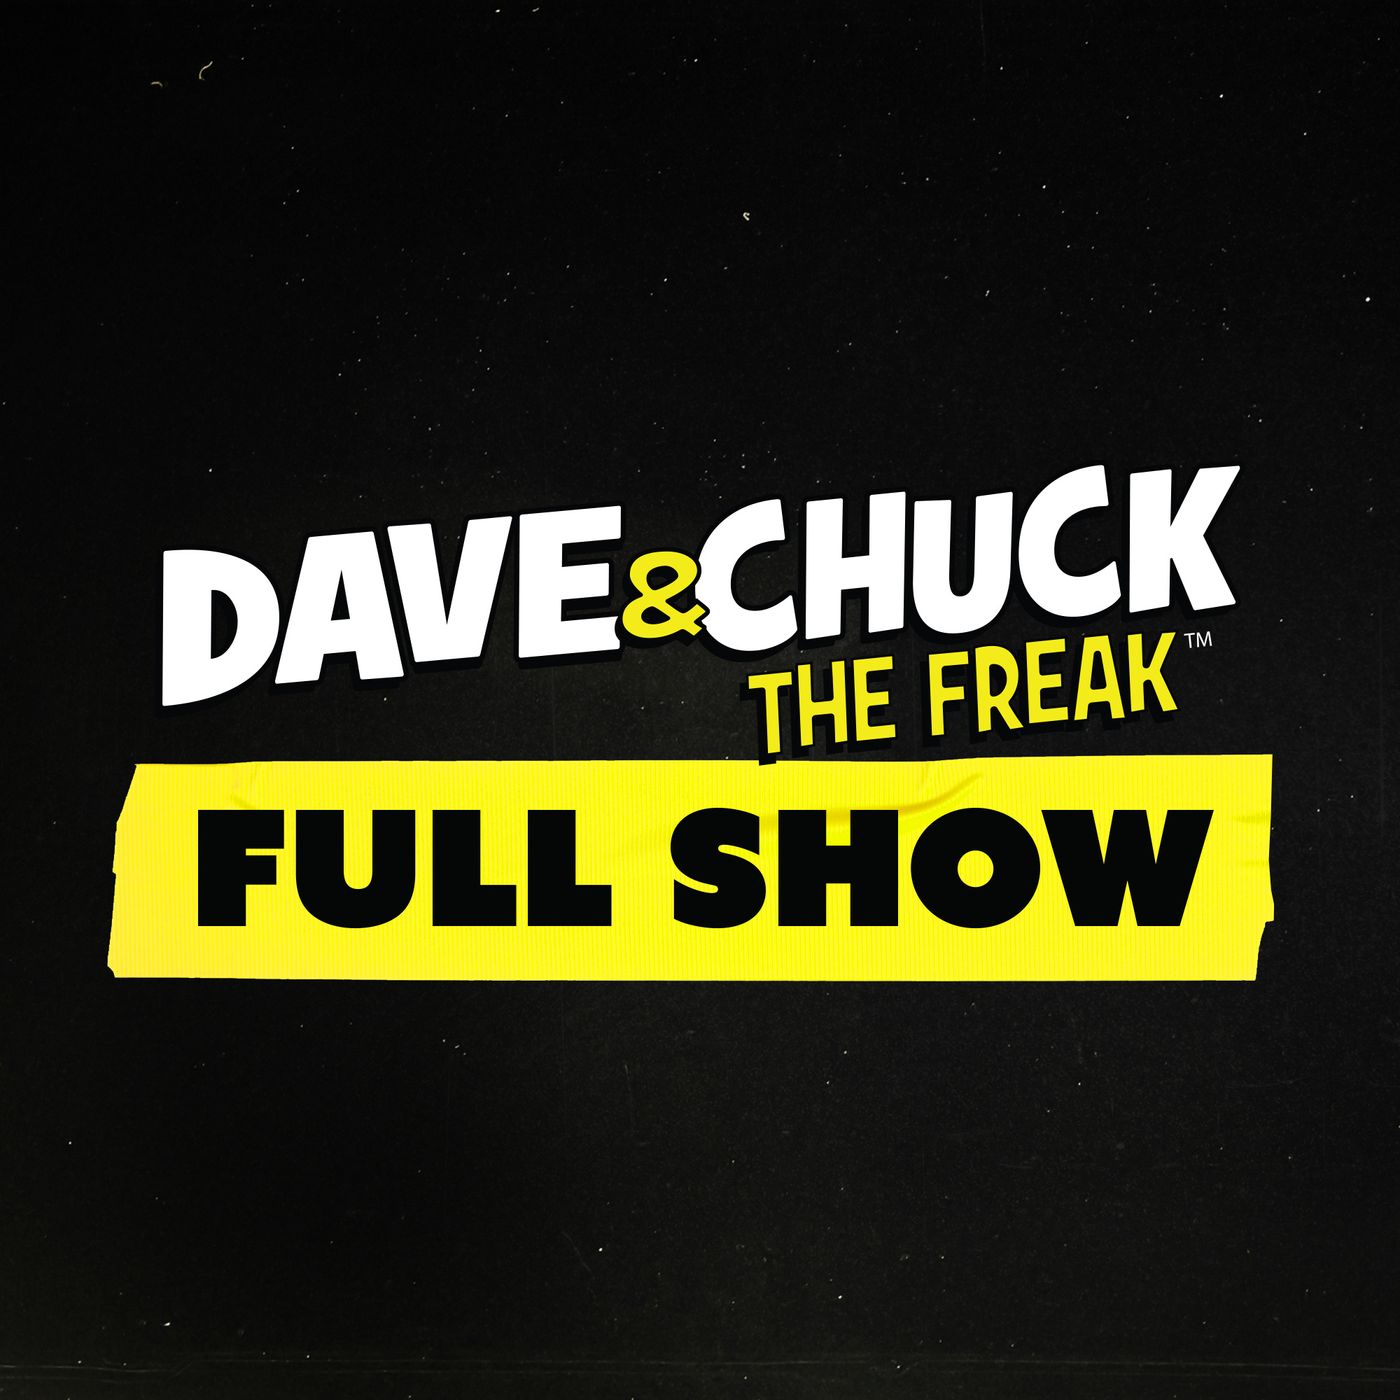 Monday, May 8th 2023 Dave & Chuck the Freak Full Show